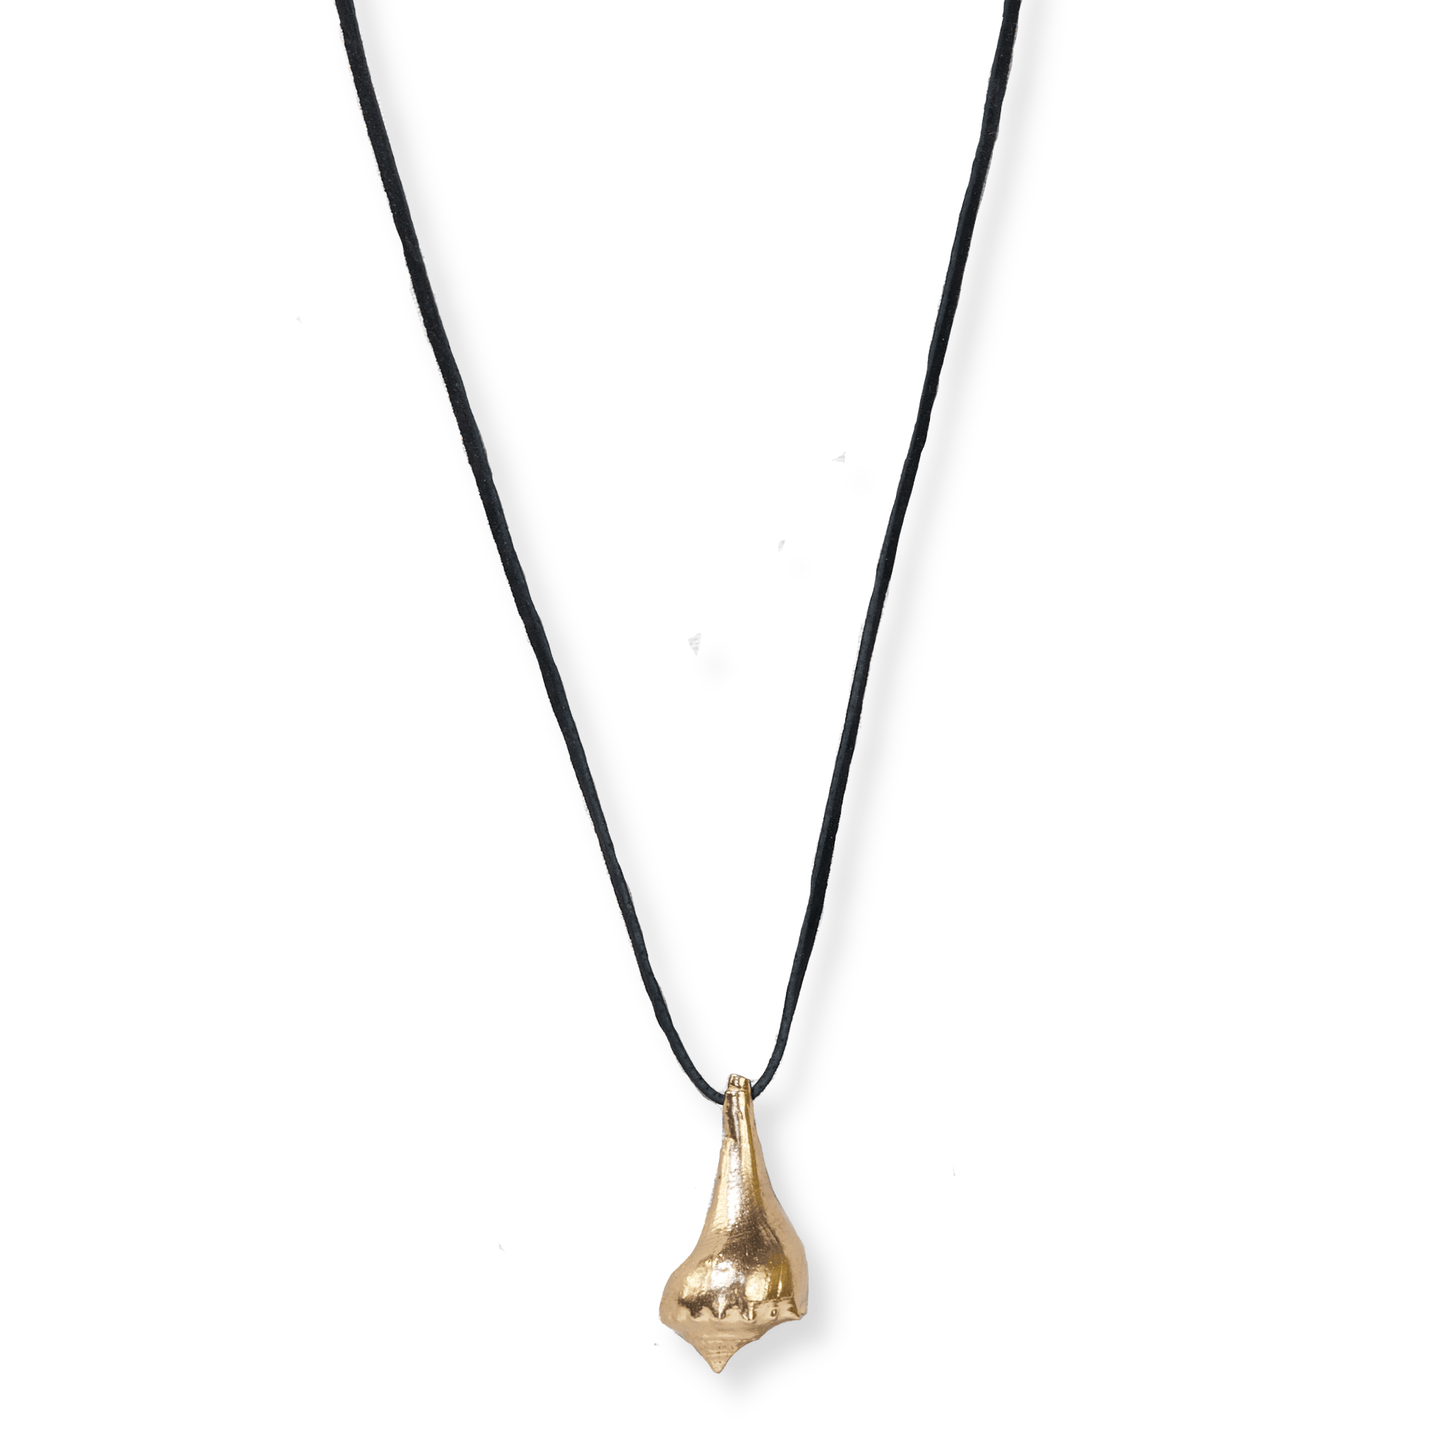 Brass Shell Pendant with Leather Cord Necklace